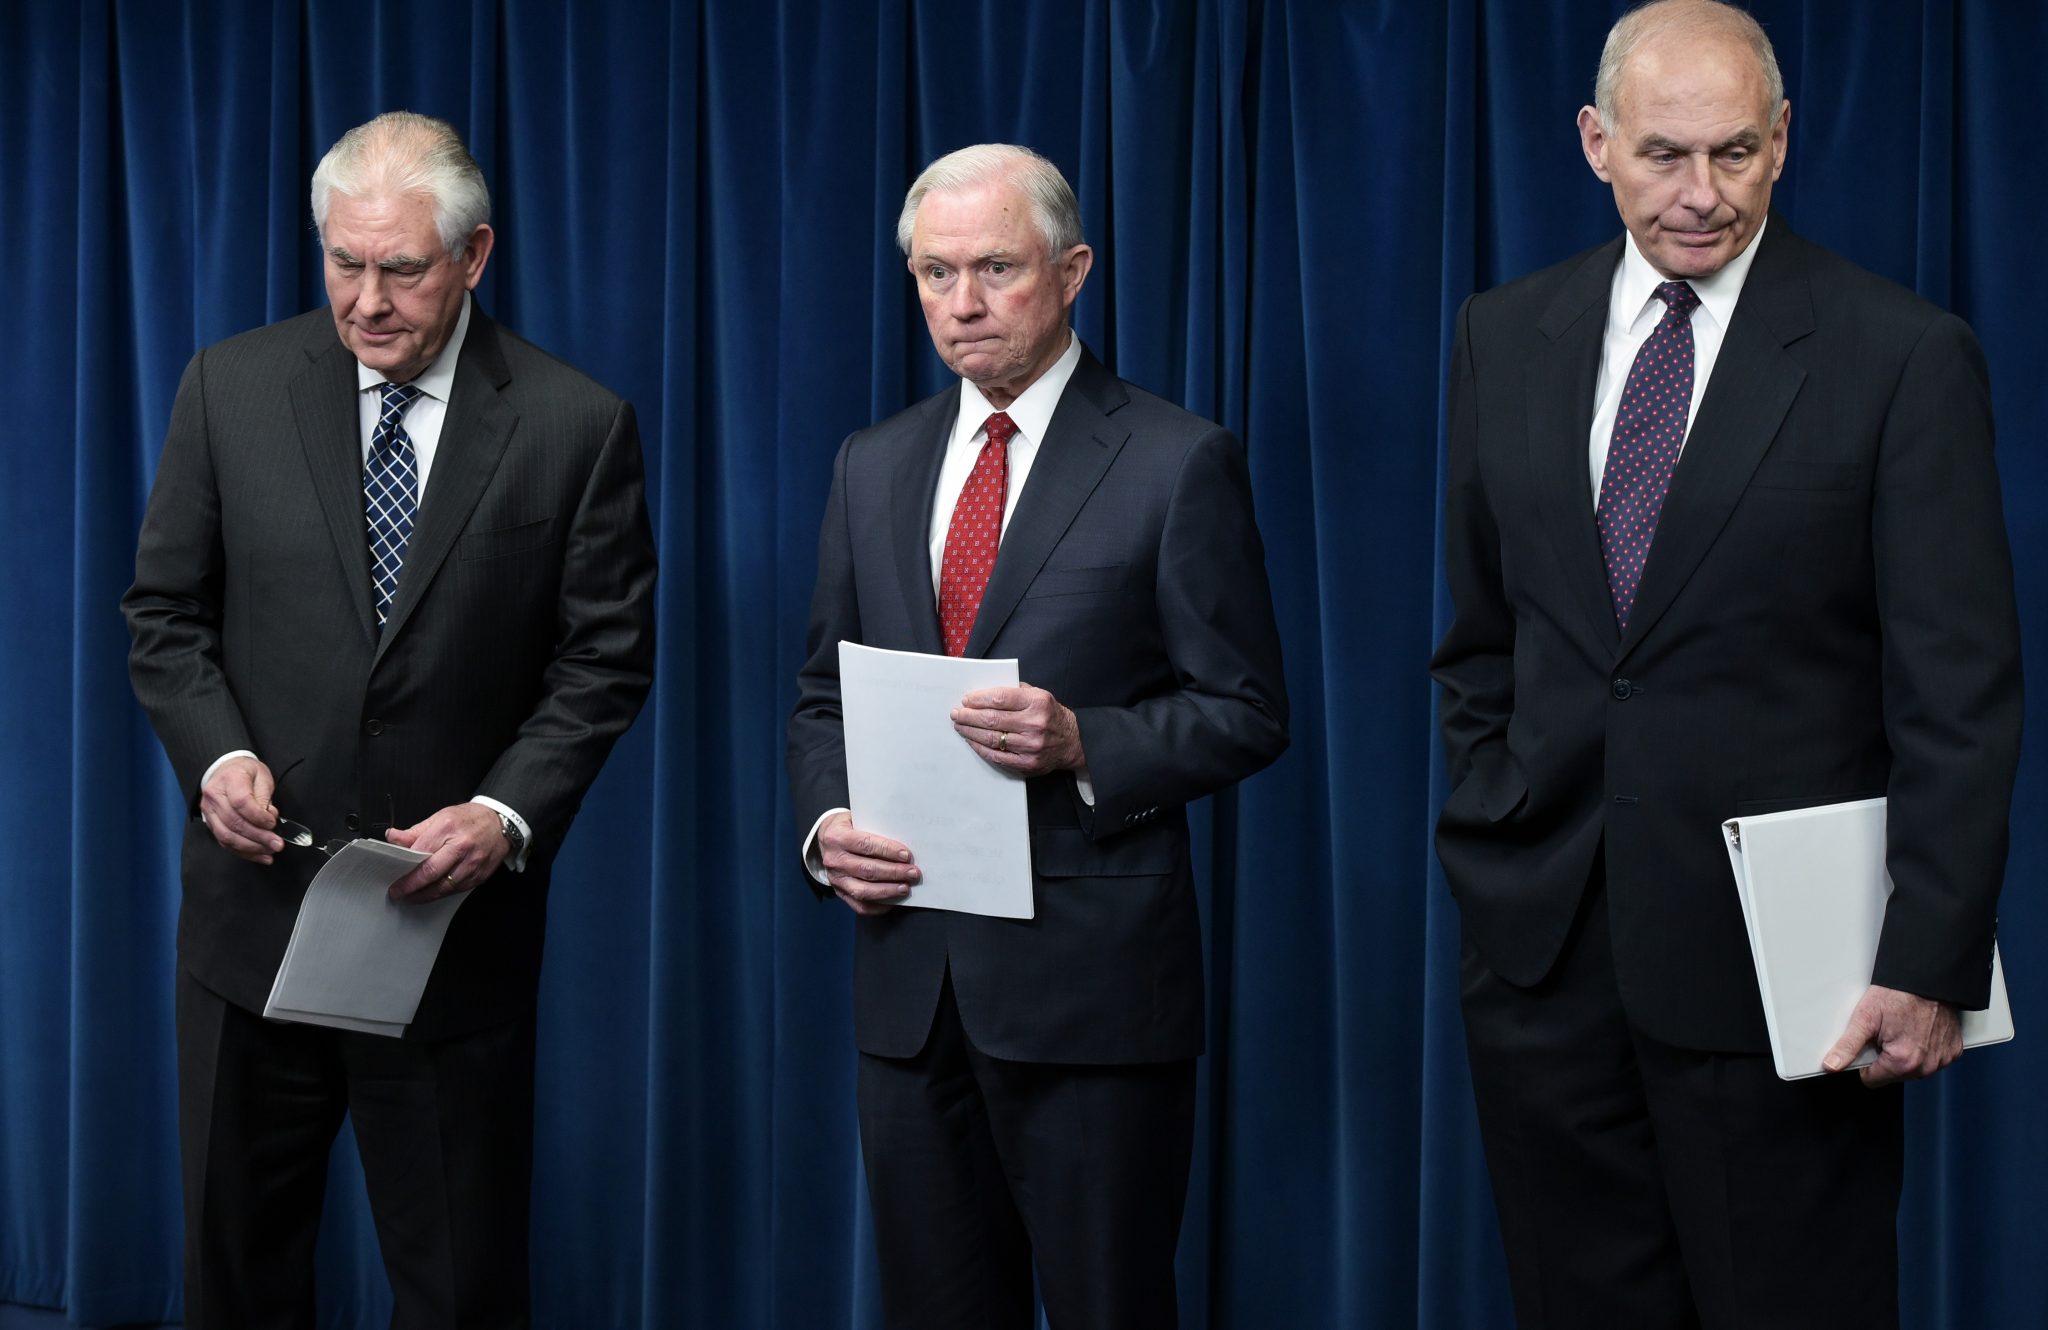 (L-R) US Secretary of State Rex Tillerson, Attorney General Jeff Sessions, and Homeland Security Secretary John Kelly arrive to deliver remarks on visa travel at the US Customs and Border Protection Press Room in the Reagan Building on March 6, 2017 in Washington, DC. US President Donald Trump signed a revised ban on travelers from six Muslim-majority nations Monday -- one with a reduced scope so Iraqis and permanent US residents are exempt. The White House said Trump signed the order -- which temporarily freezes new visas for Syrians, Iranians, Libyans, Somalis, Yemenis and Sudanese citizens -- behind closed doors "this morning". / AFP PHOTO / MANDEL NGAN